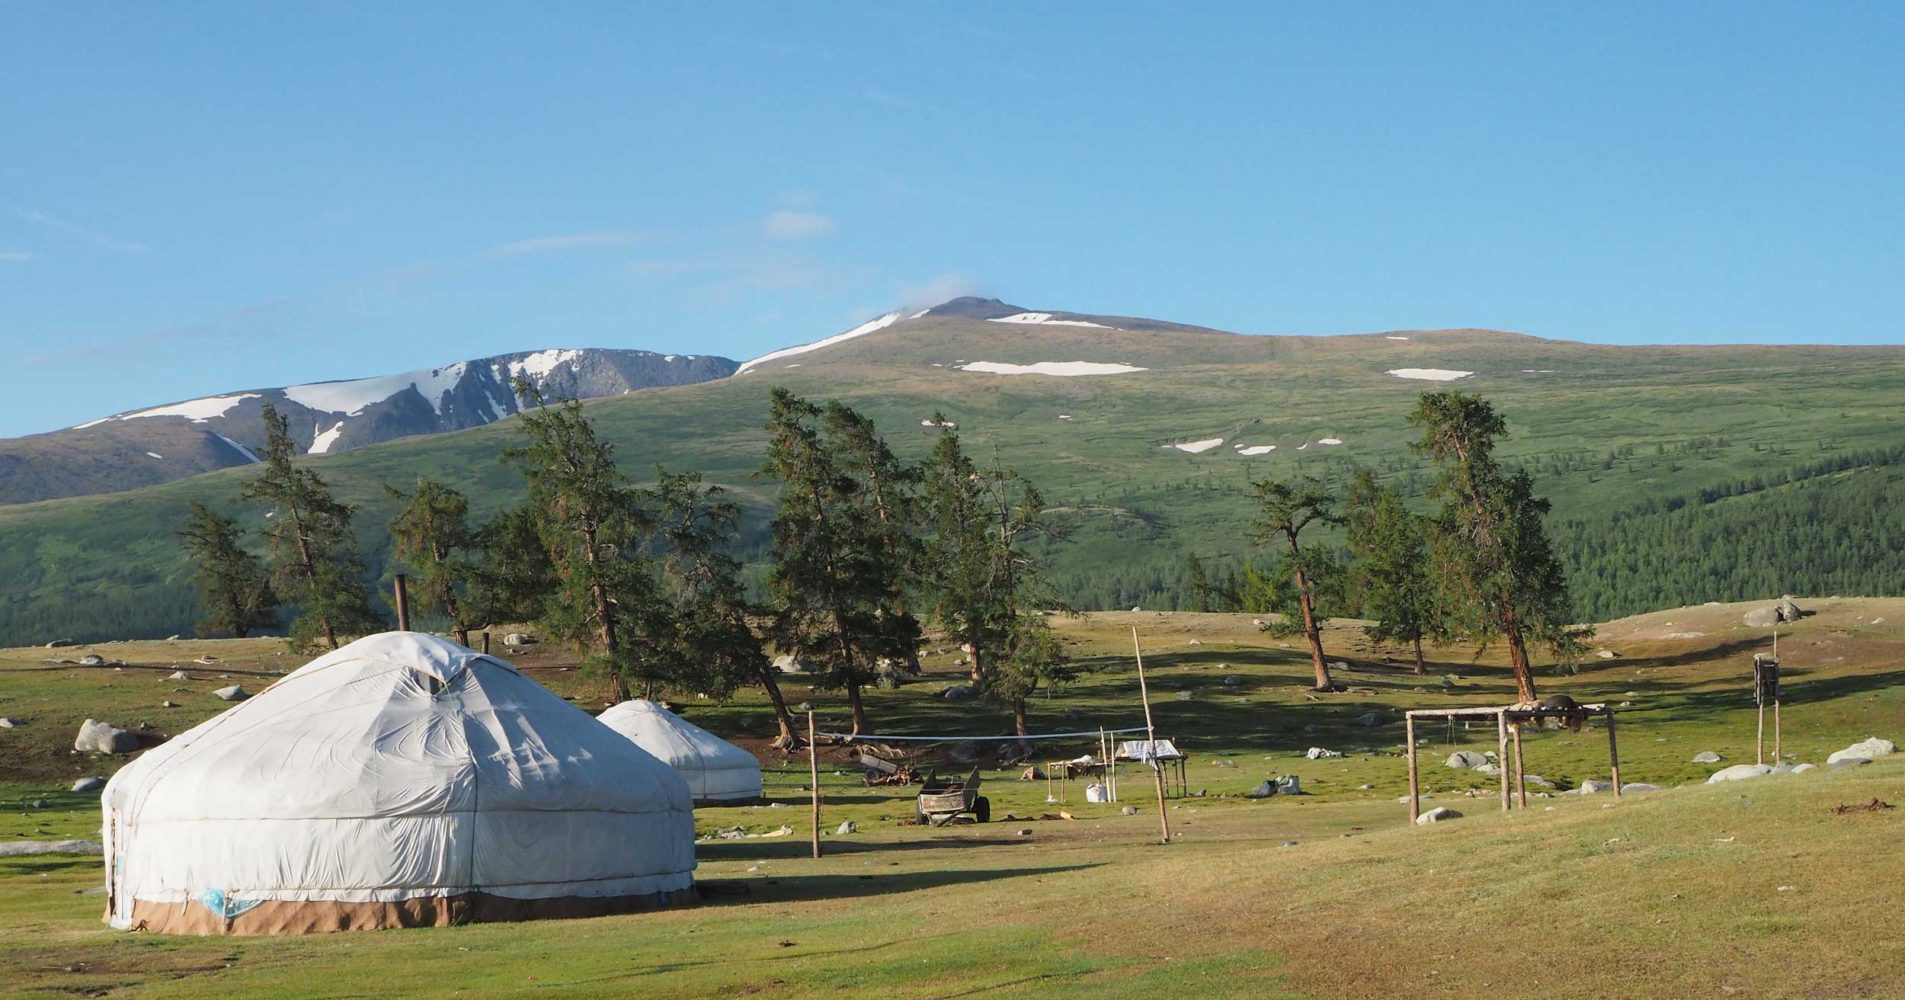 White yurts in a field with trees and snow capped mountain in the distance, Mongolia